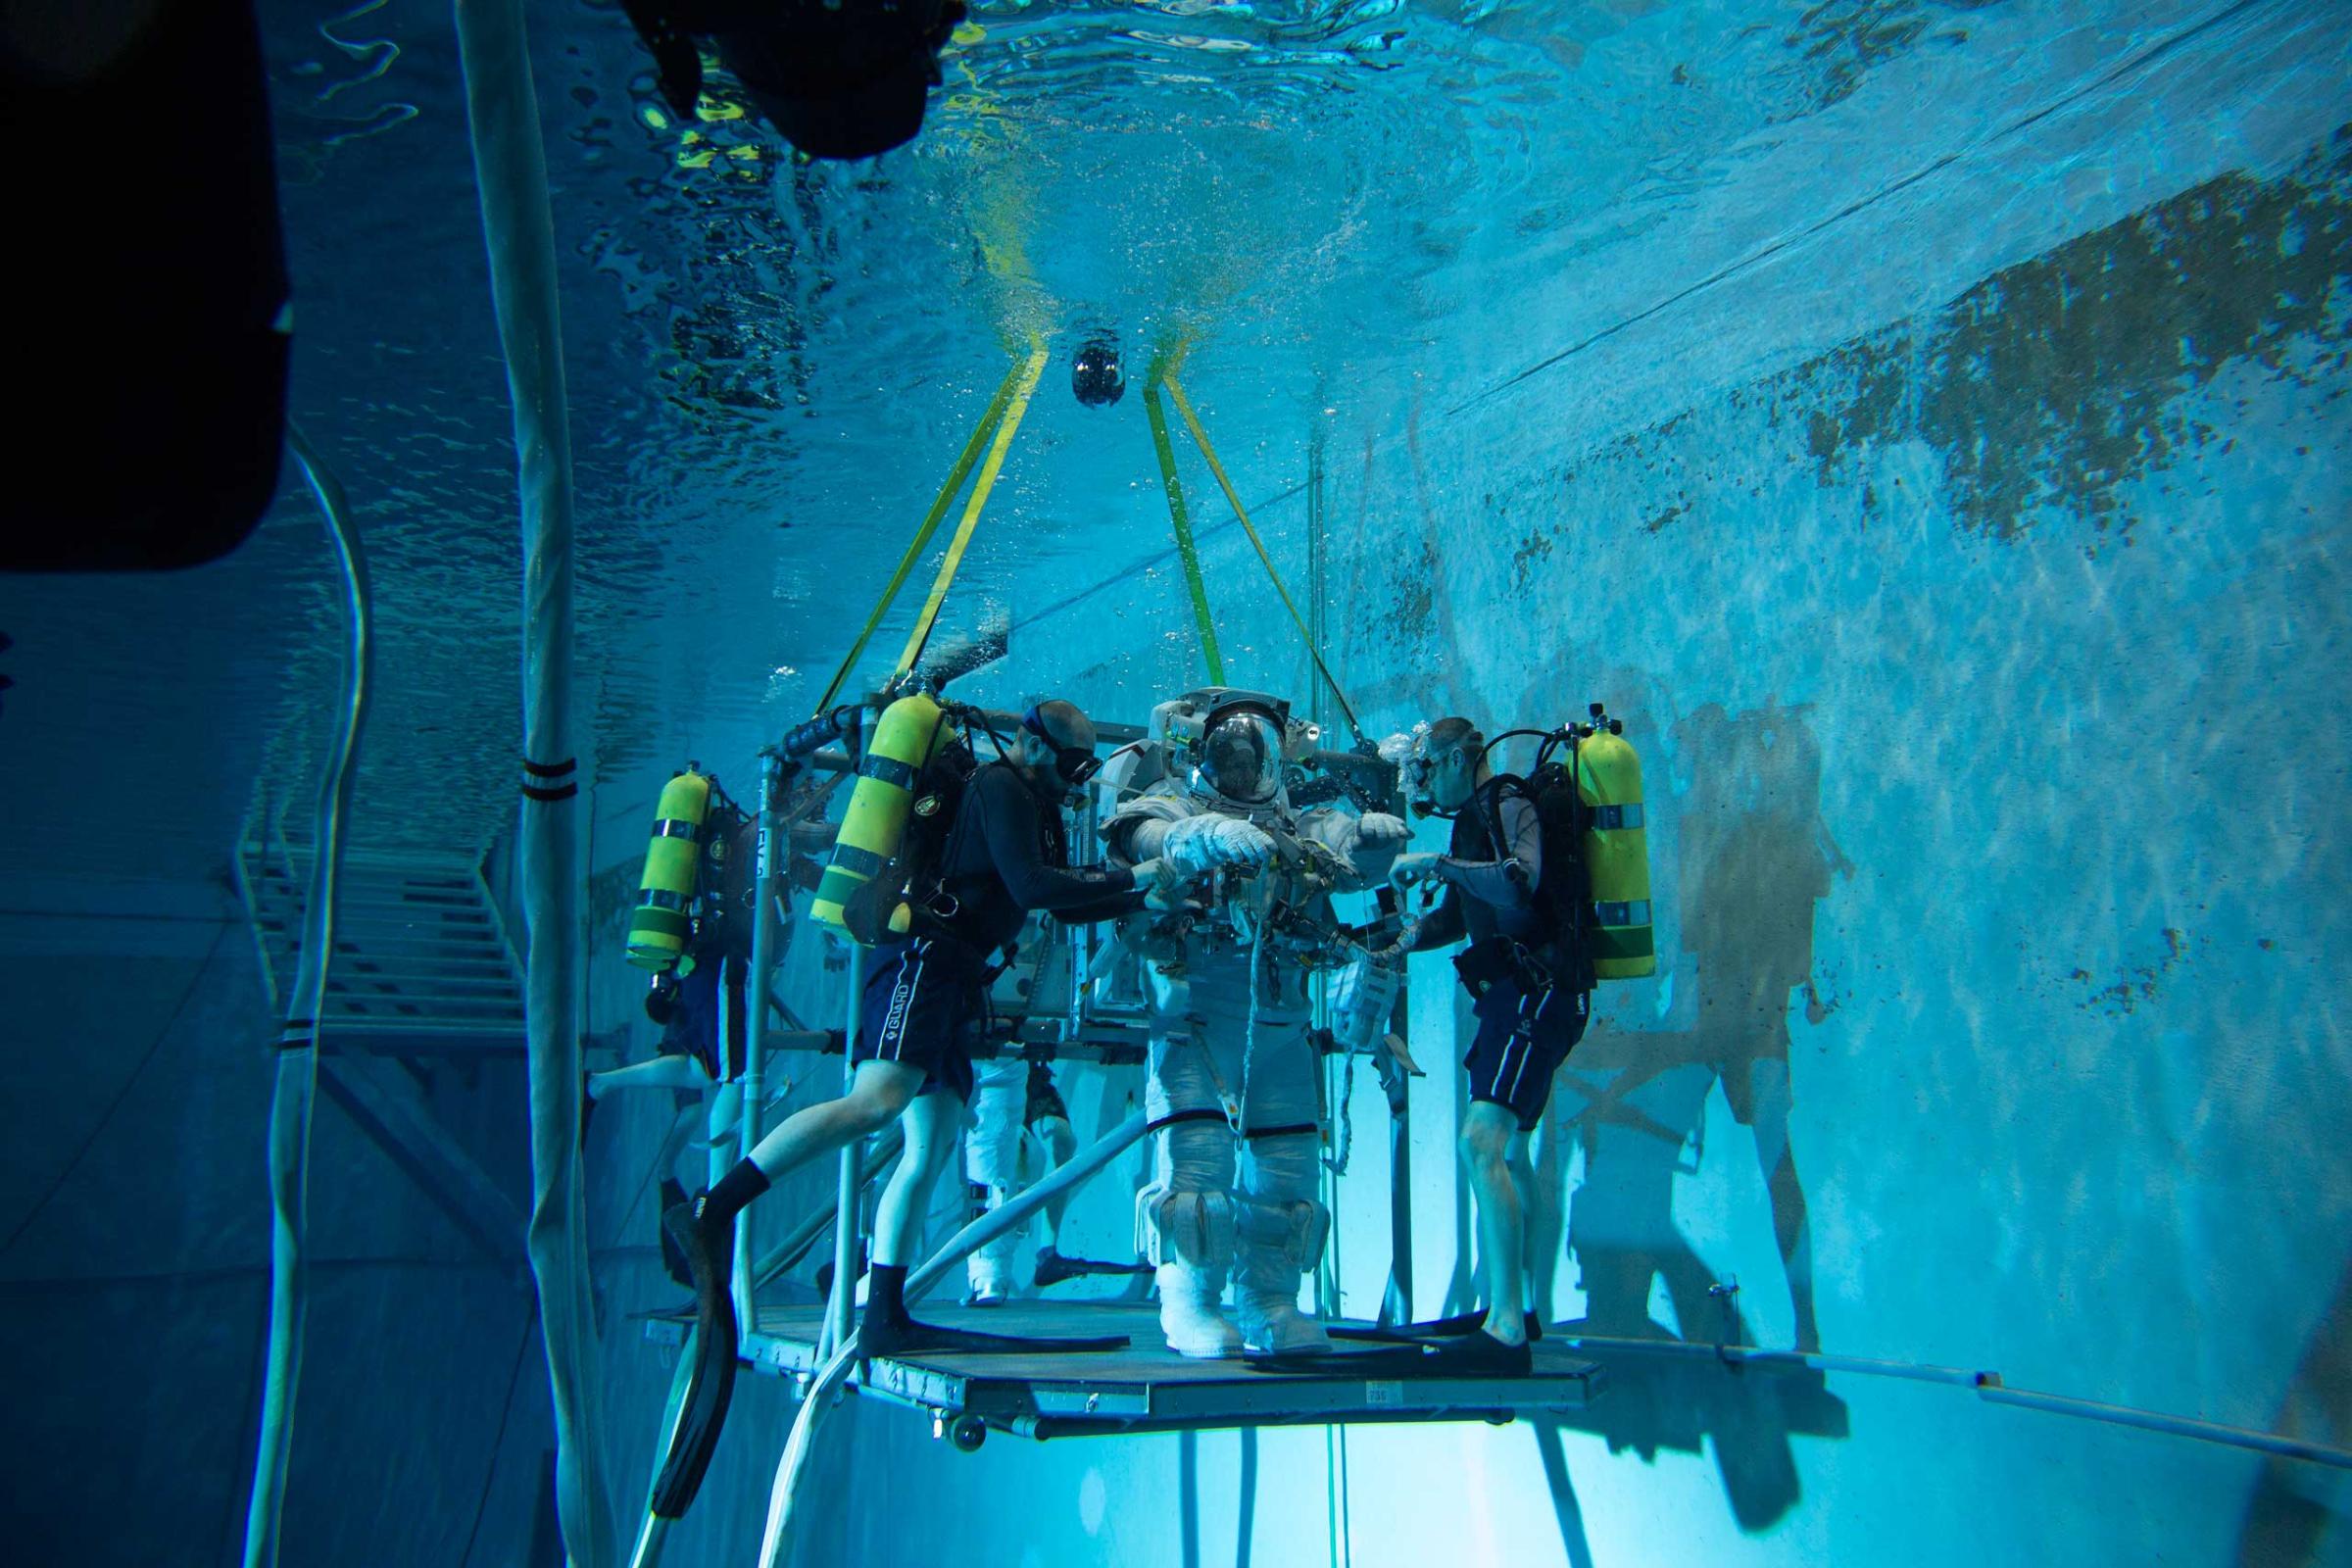 Divers check Scott Kelly's suit for leaks as he prepares for underwater training on in Houston on Feb. 2. Even though the spacesuit weighs more than Scott, due to the air inside it, he does not sink like a rock in the pool, but instead becomes neutrally buoyant, simulating weightlessness.